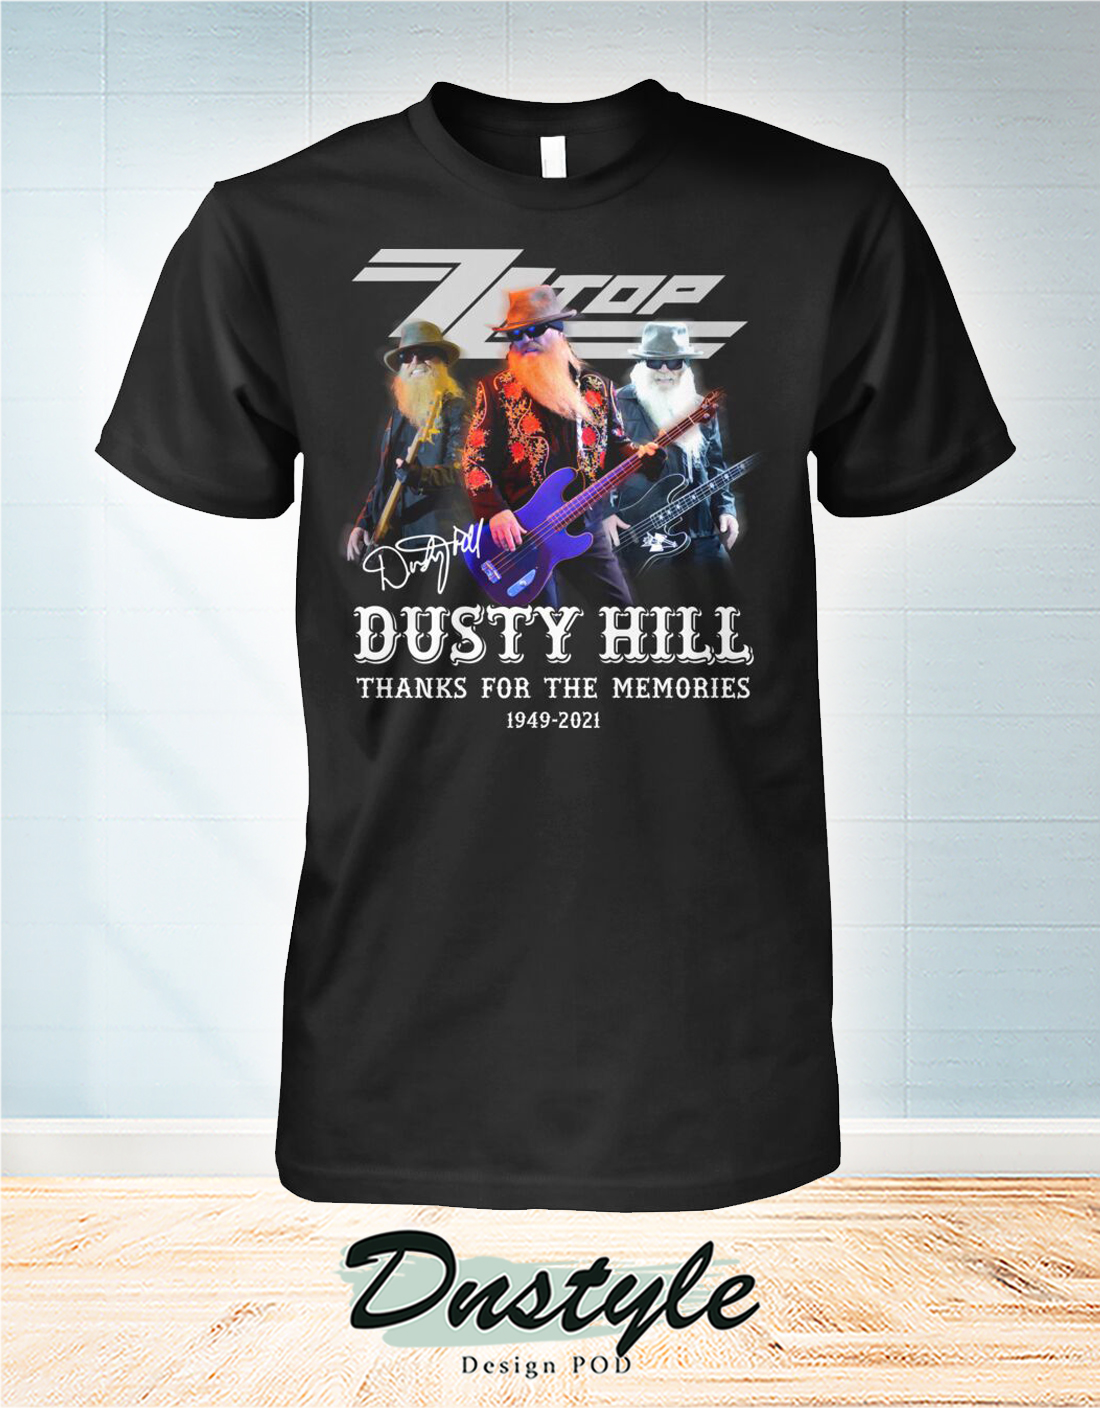 Zz Top Dusty Hill thanks for the memories signature shirt